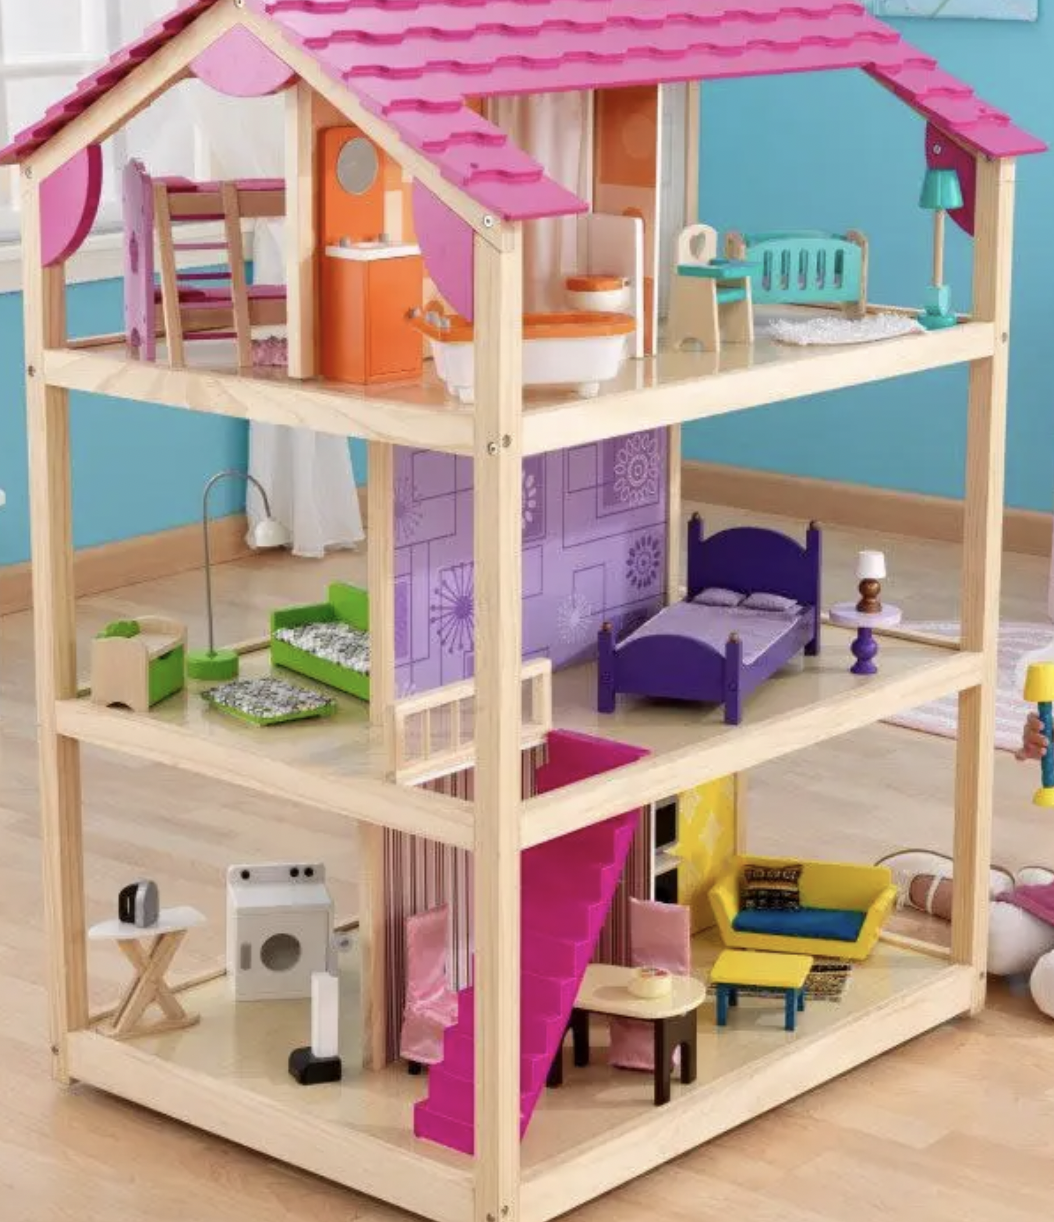 Tips for Remodeling a Dollhouse - after